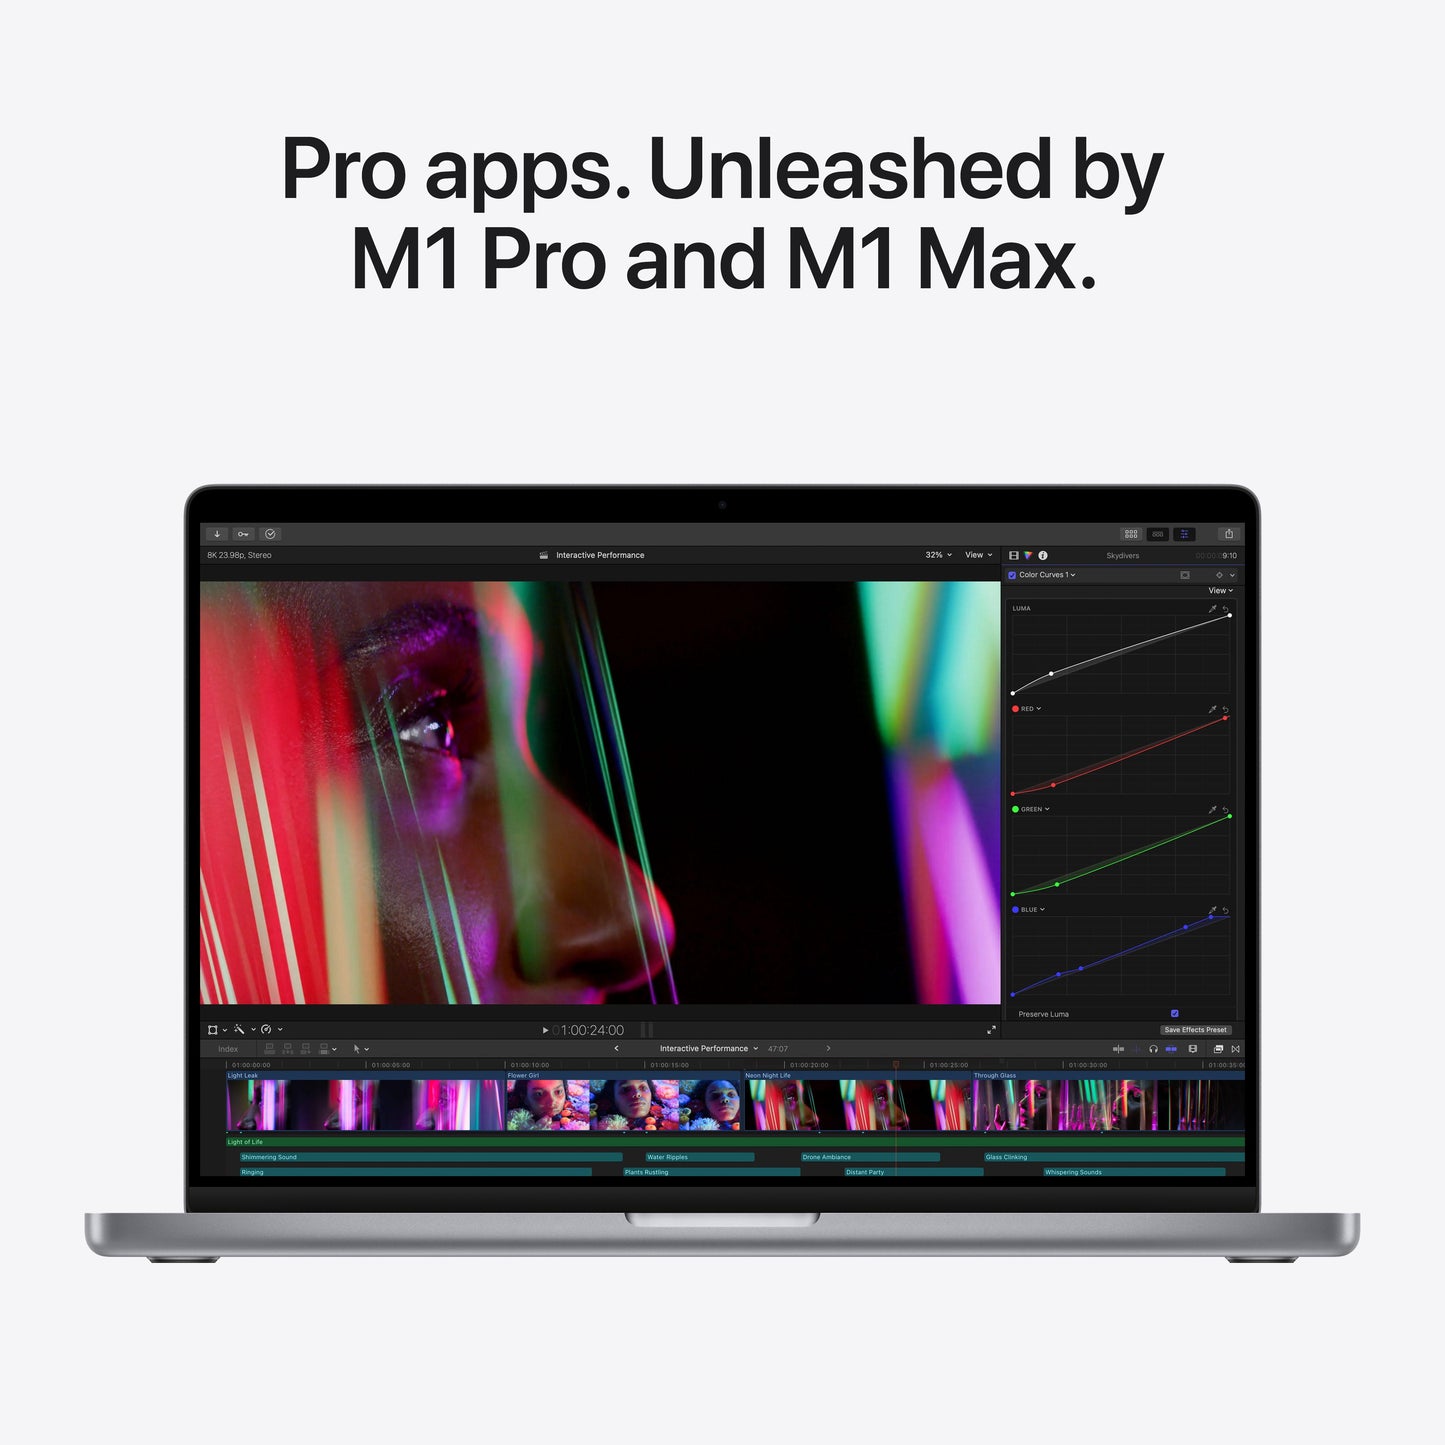 16-inch MacBook Pro: Apple M1 Max chip with 10‑core CPU and 32‑core GPU, 1TB SSD - Space Grey